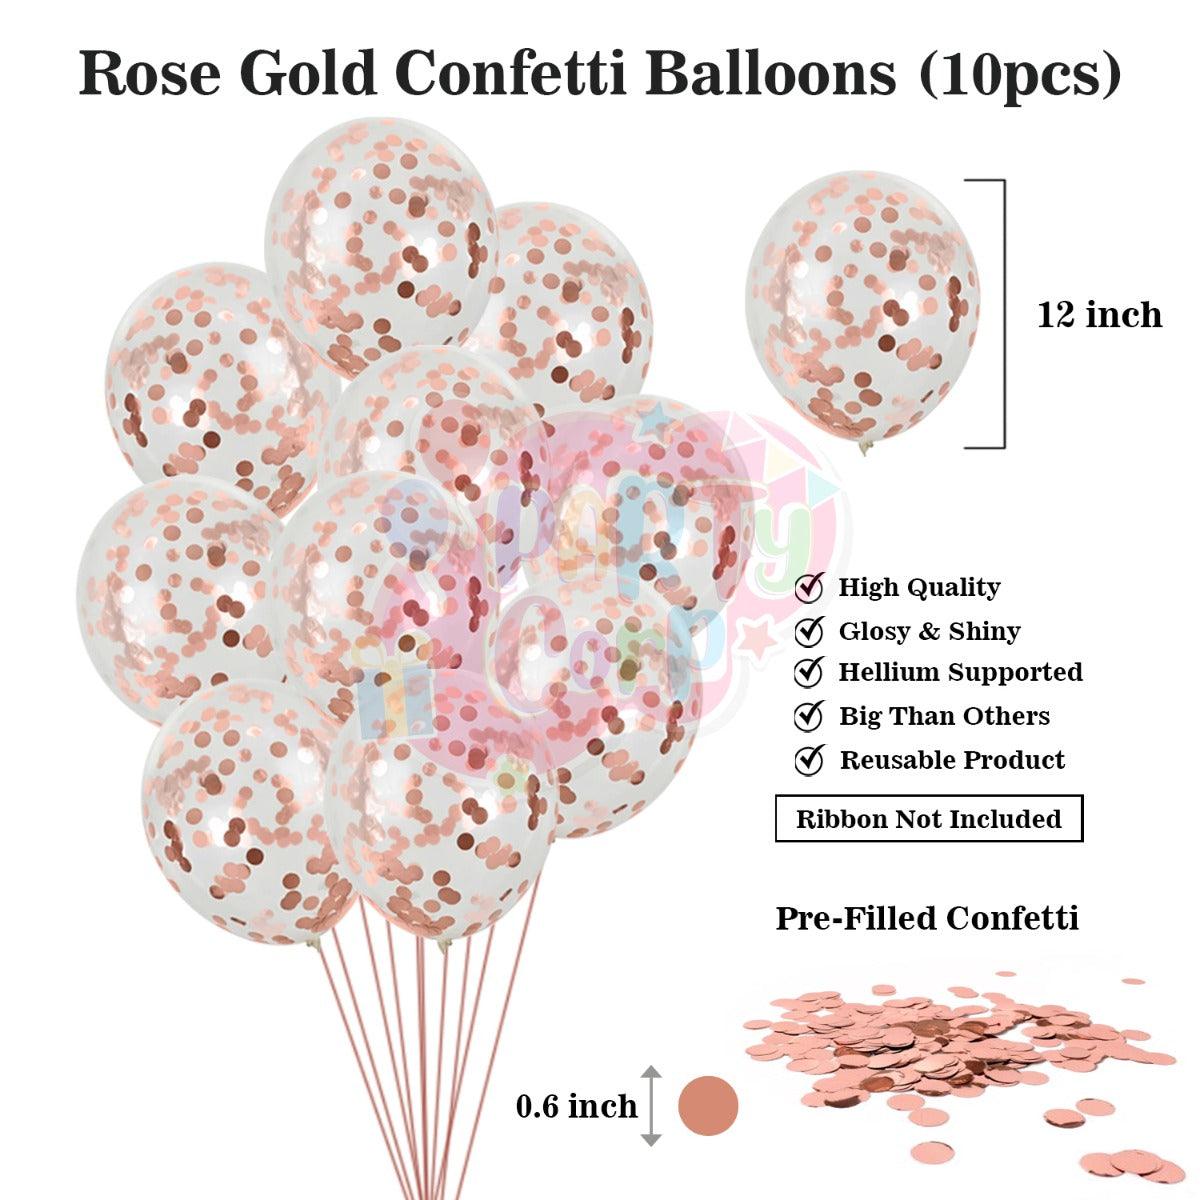 PartyCorp Happy Birthday Decoration Kit Combo 11 Pcs - Rose Gold Confetti Balloon, Rose Gold Happy birthday Alphabets Cut Out Banner